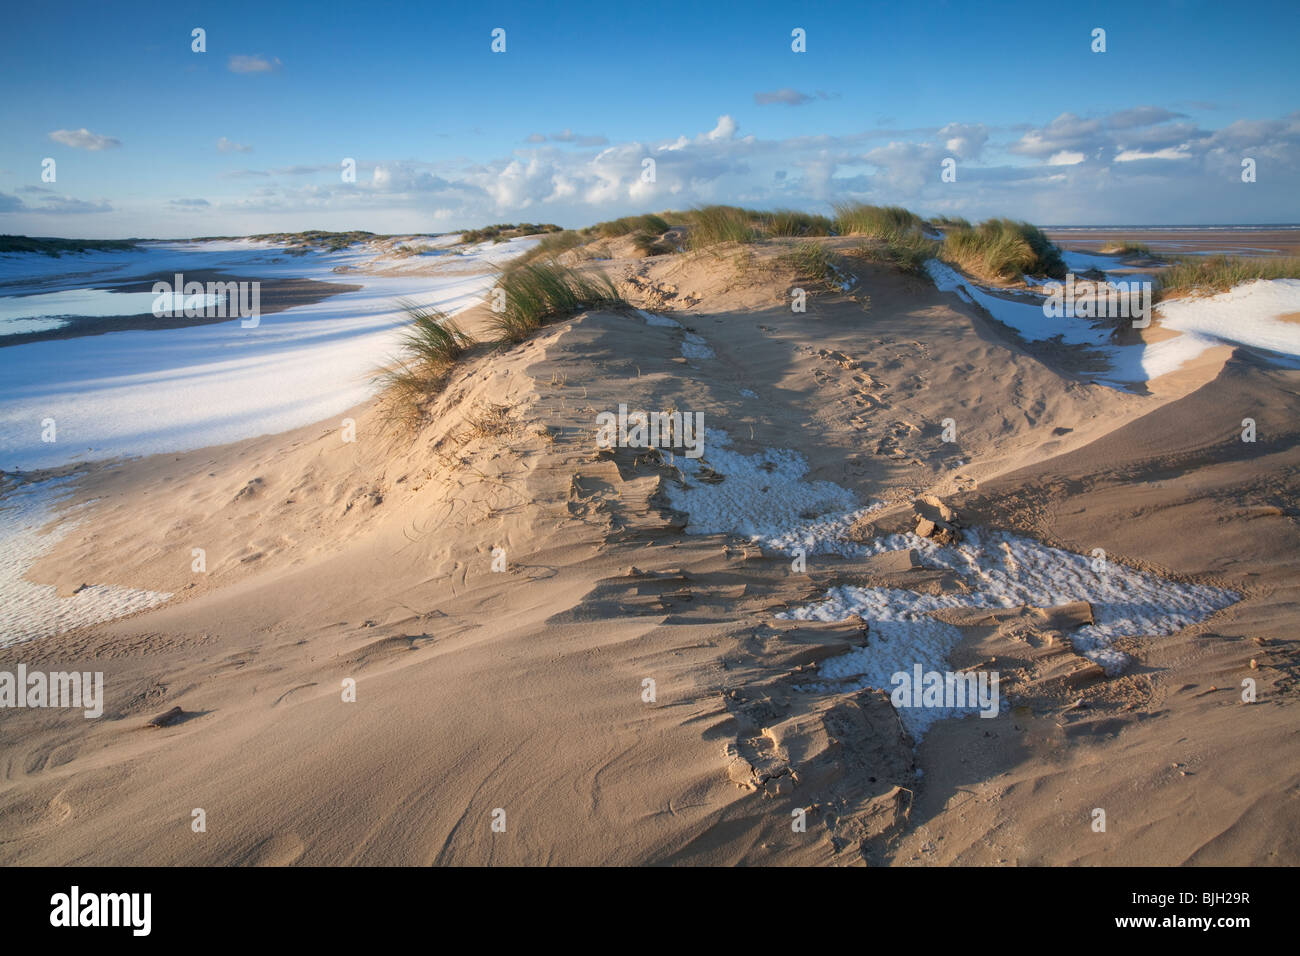 Winter snow on the beach and sand dunes at Holkham Bay on the North Norfolk Coast. Stock Photo